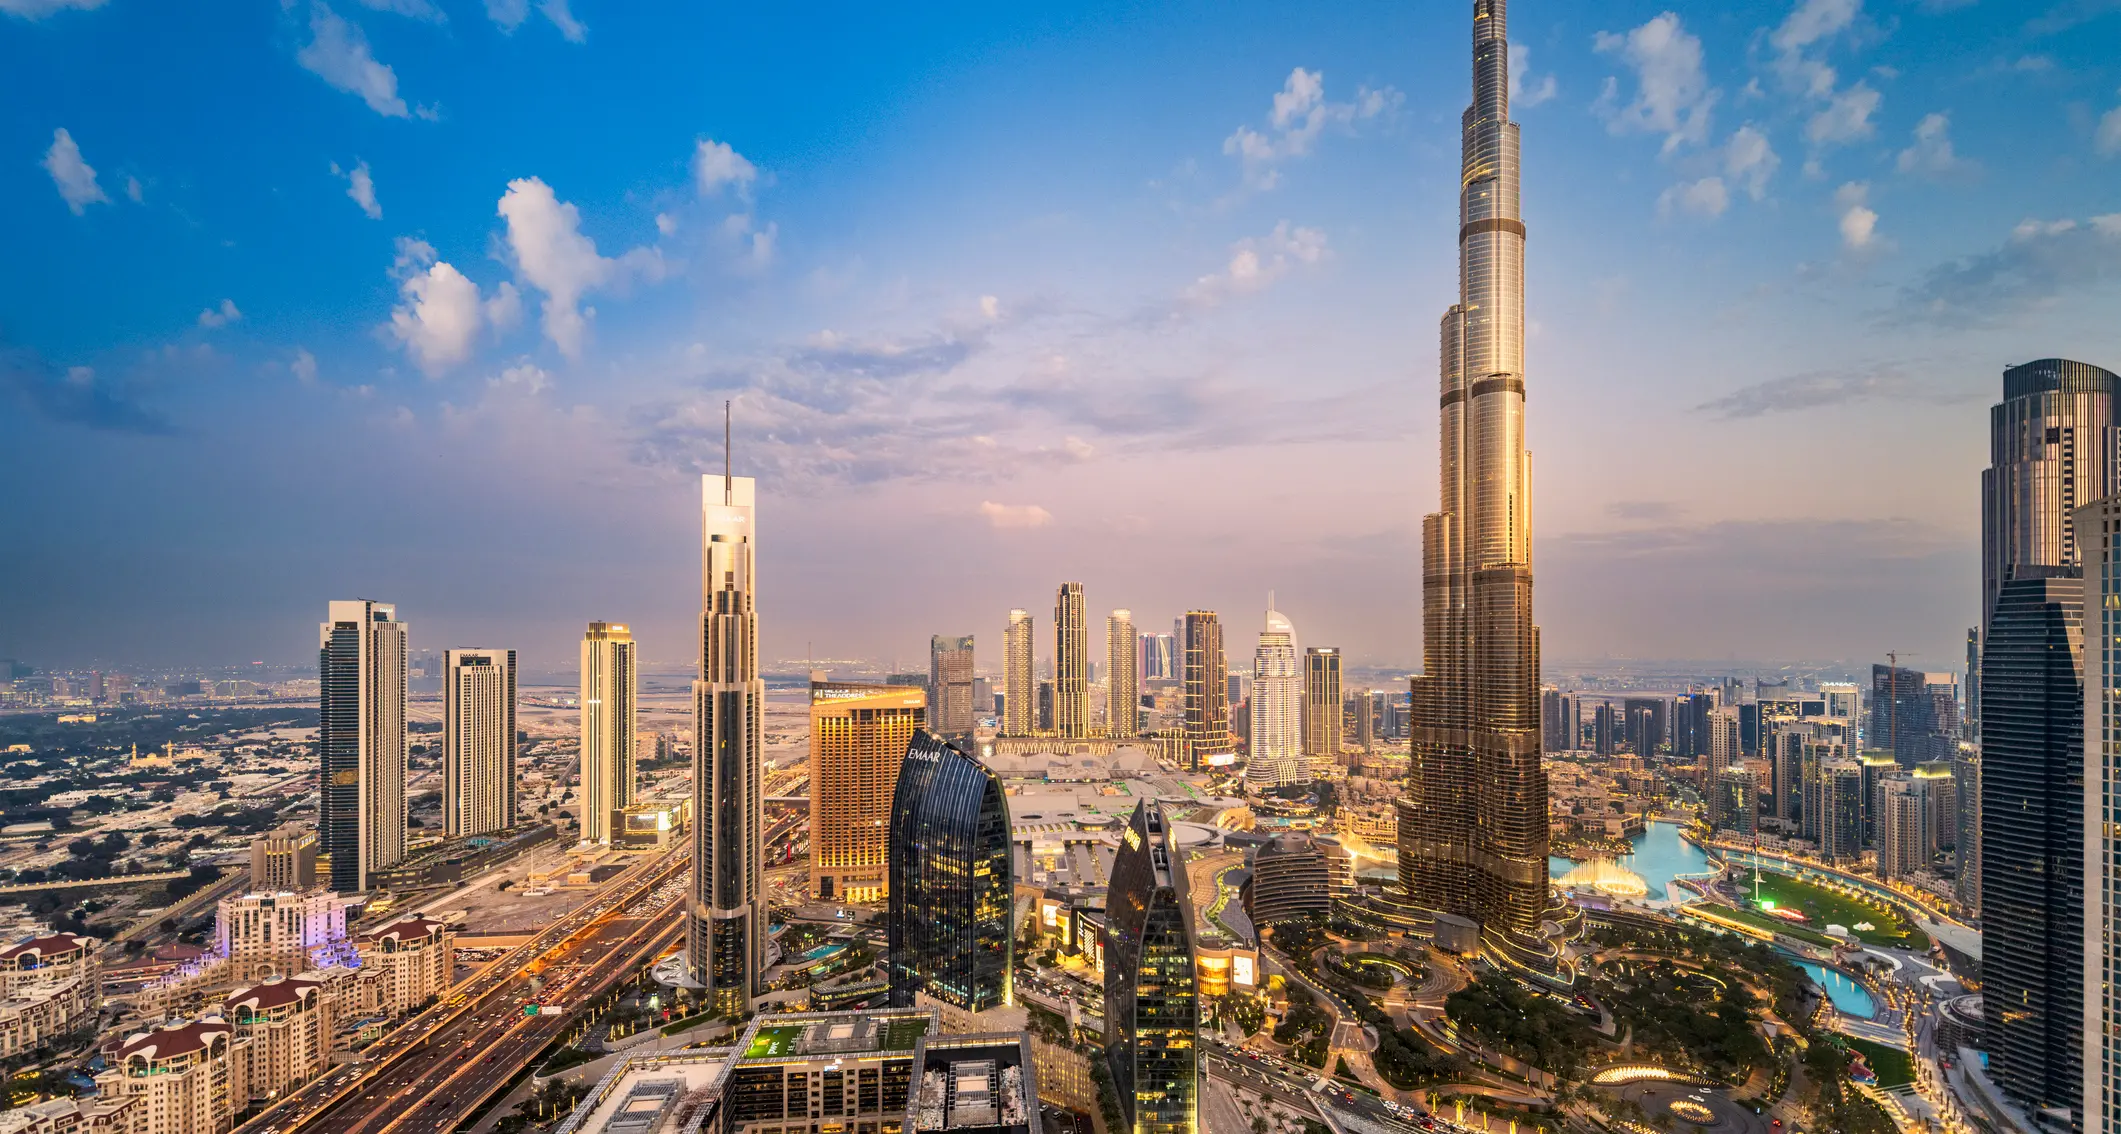 Dubai property prices are soaring. Should you invest now?